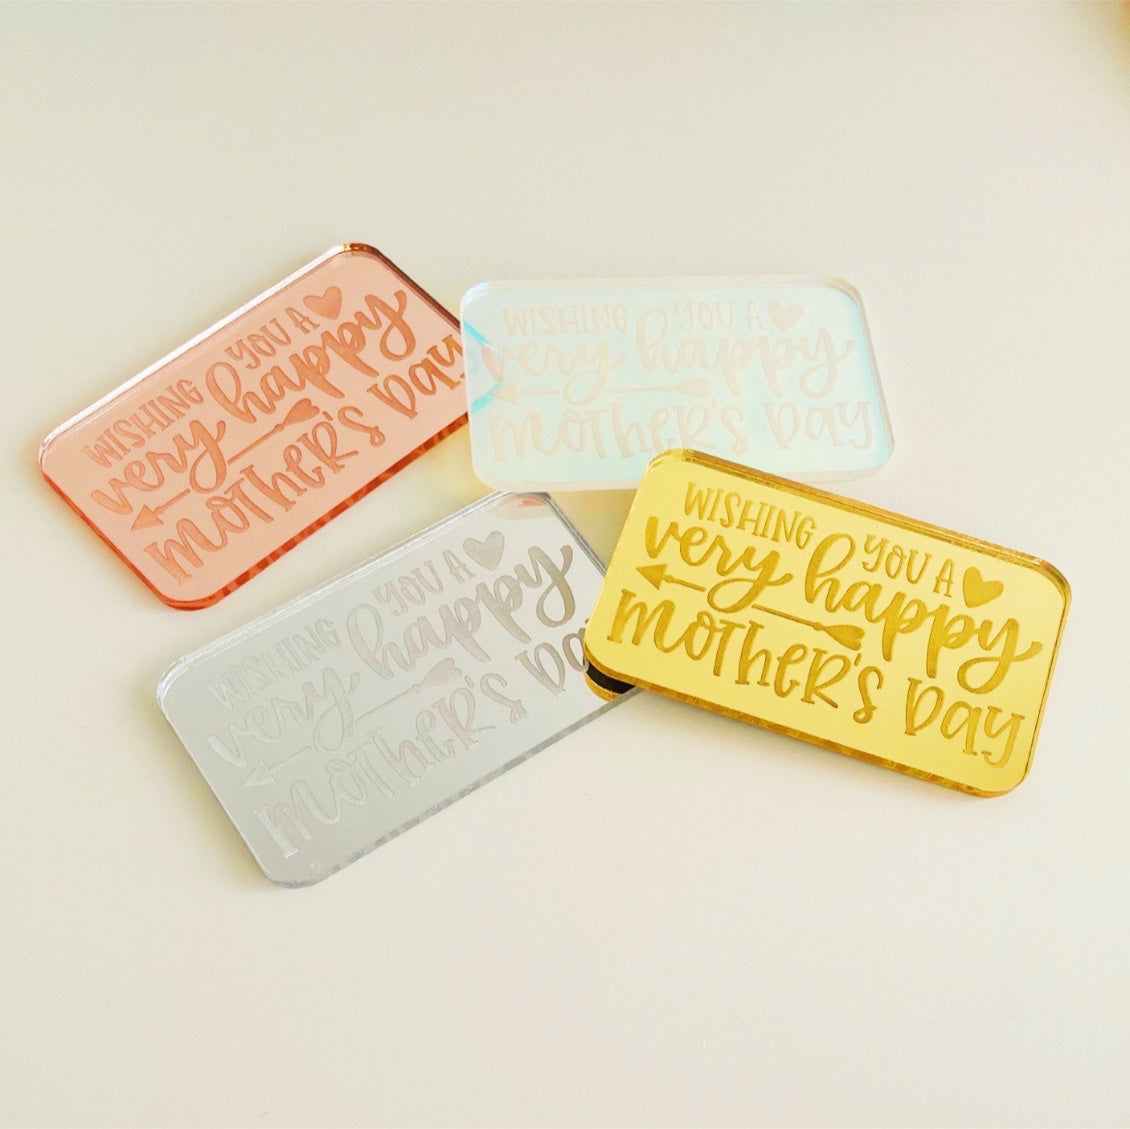 Rectangle Acrylic Cake Charms Wishing You a Very Happy Mother's Day.